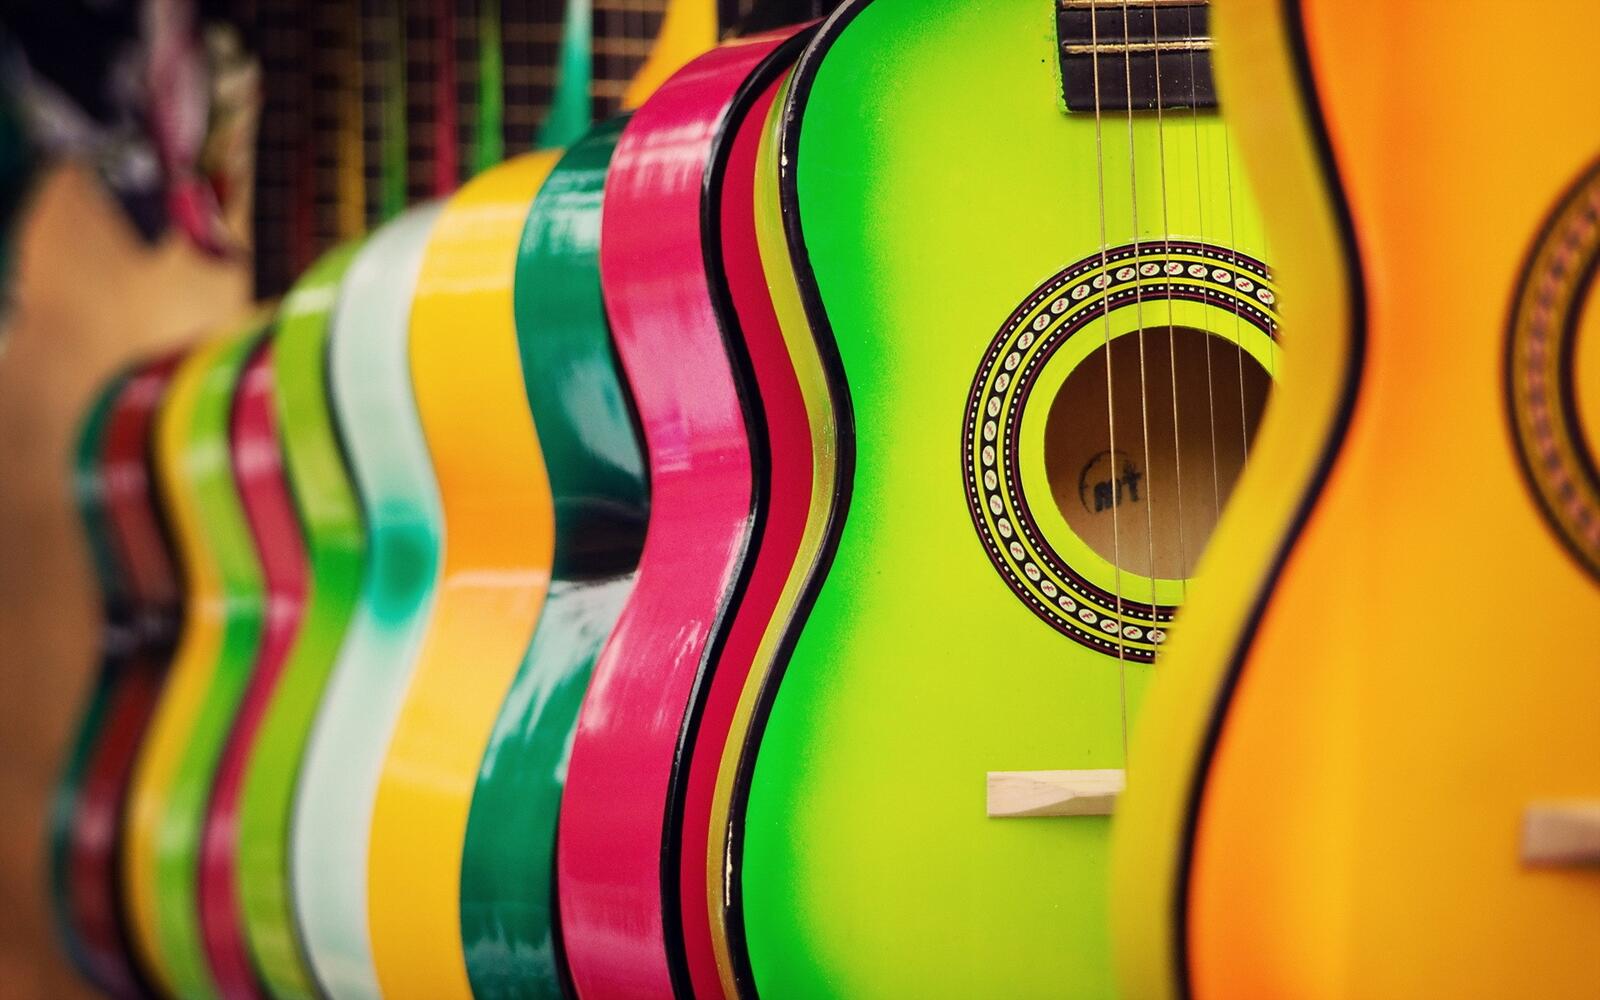 Free photo A picture of colored guitars